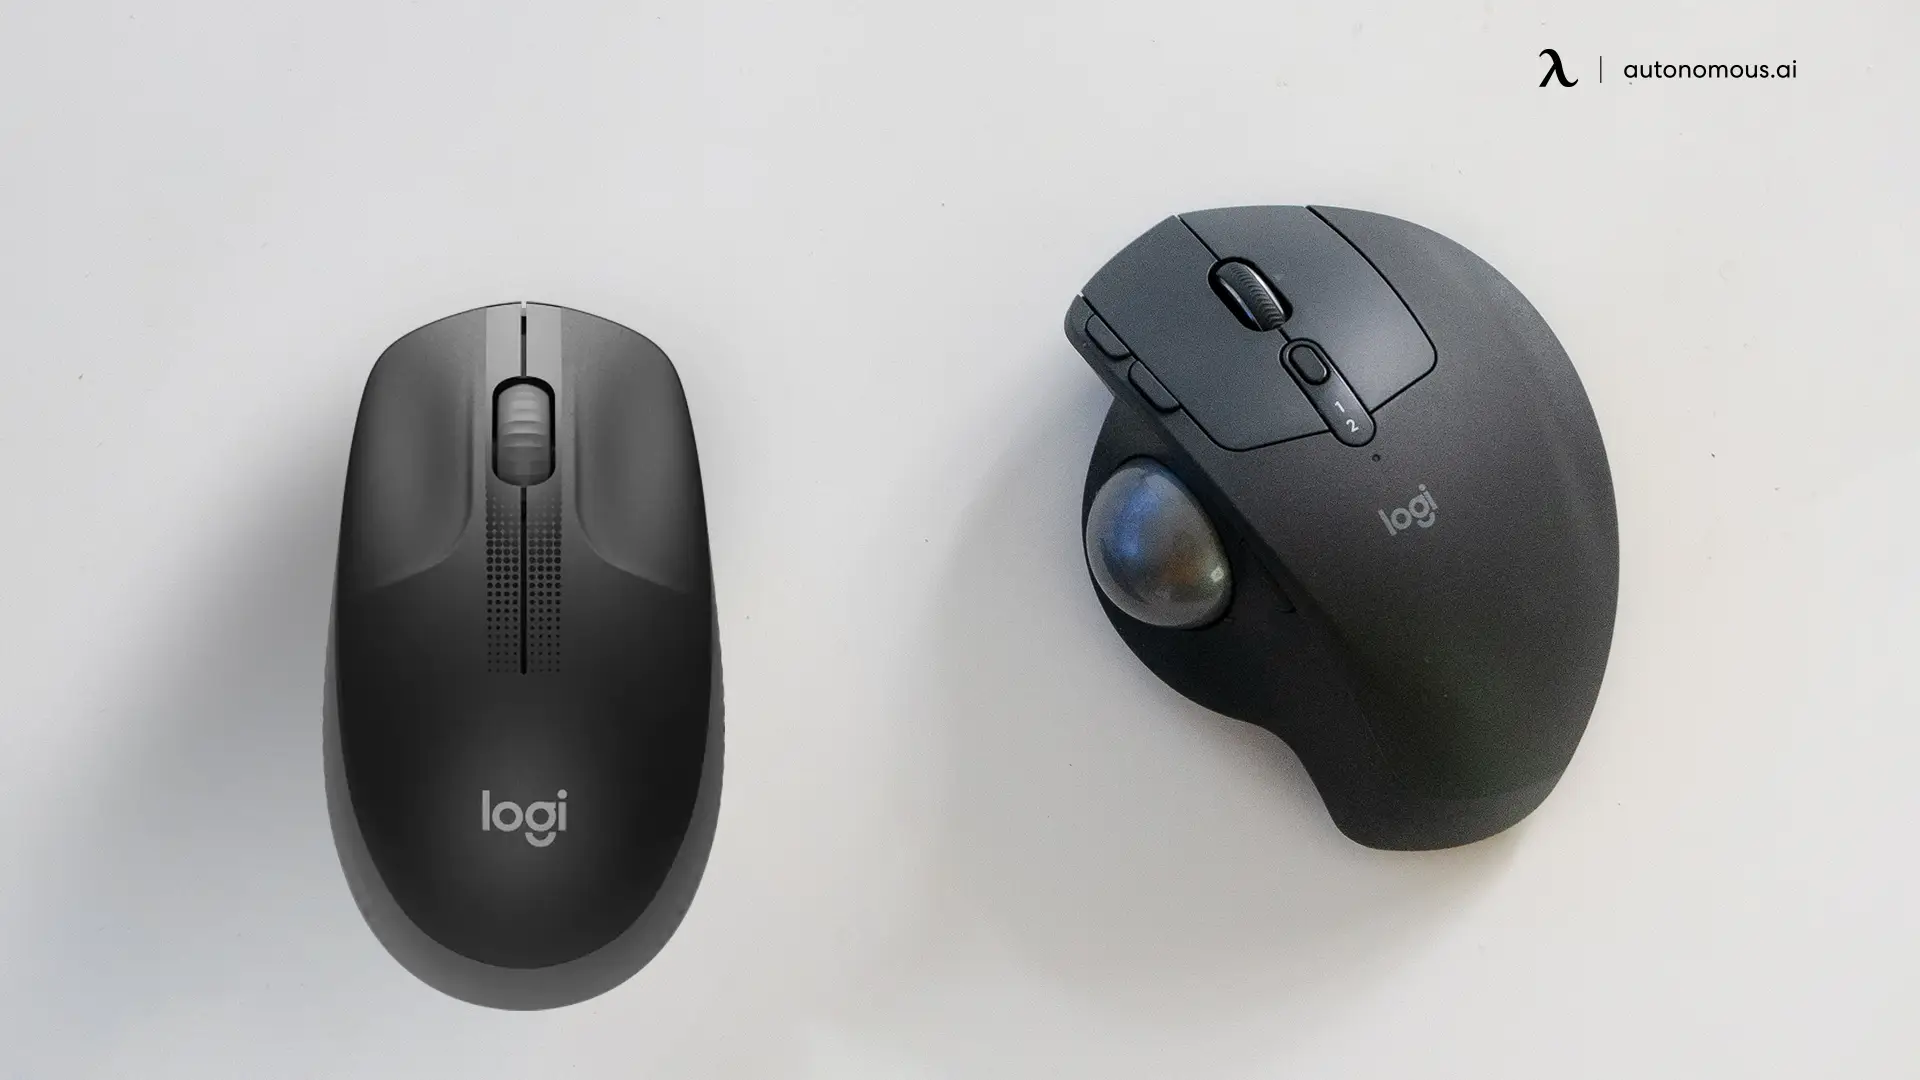 Key Differences Between a Trackball Mouse vs. a Regular Mouse